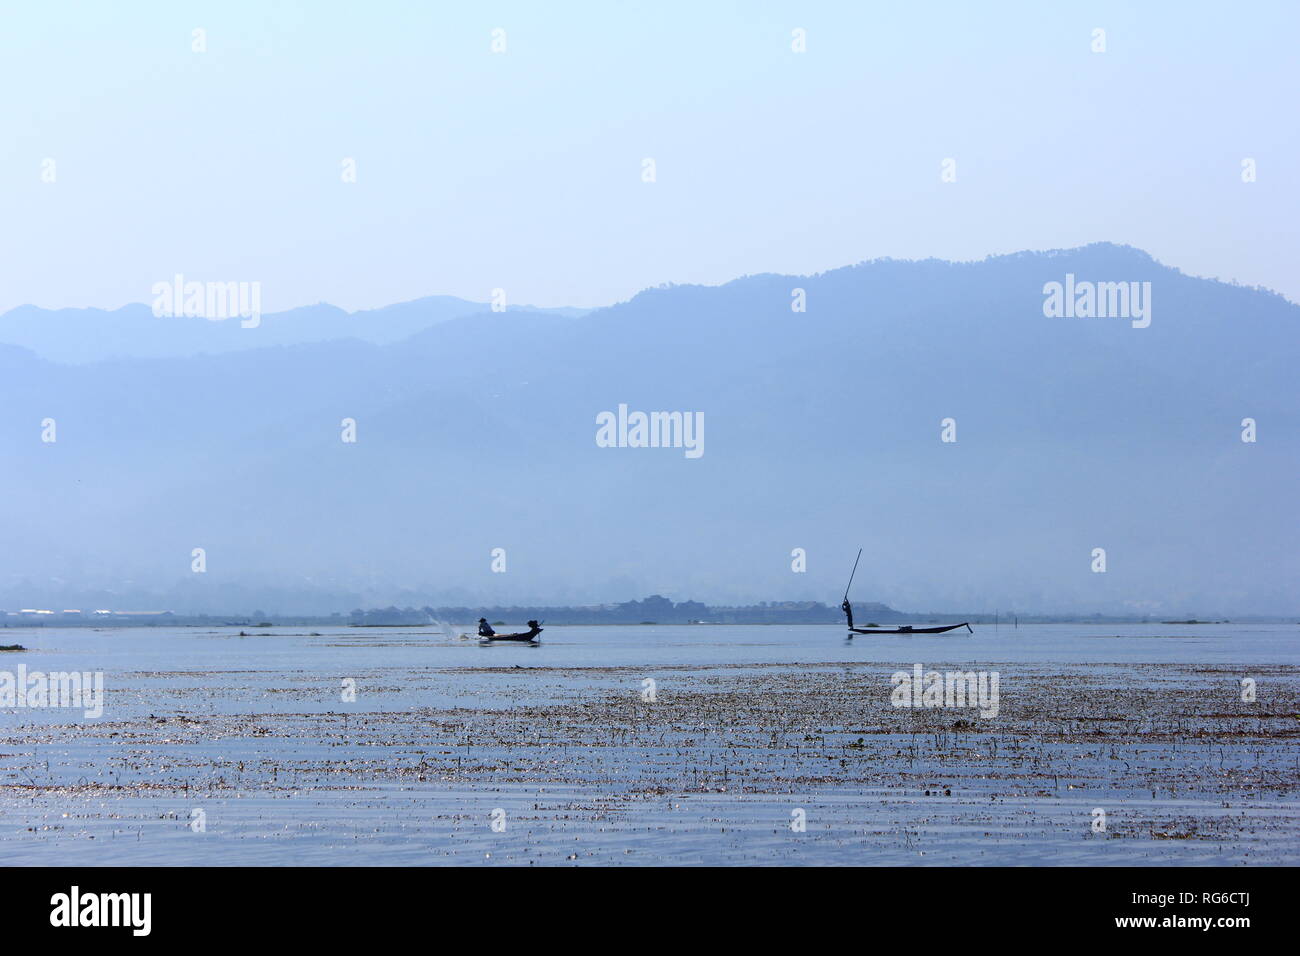 Fisherman working on a sunny day on Inle lake in Myanmar Stock Photo